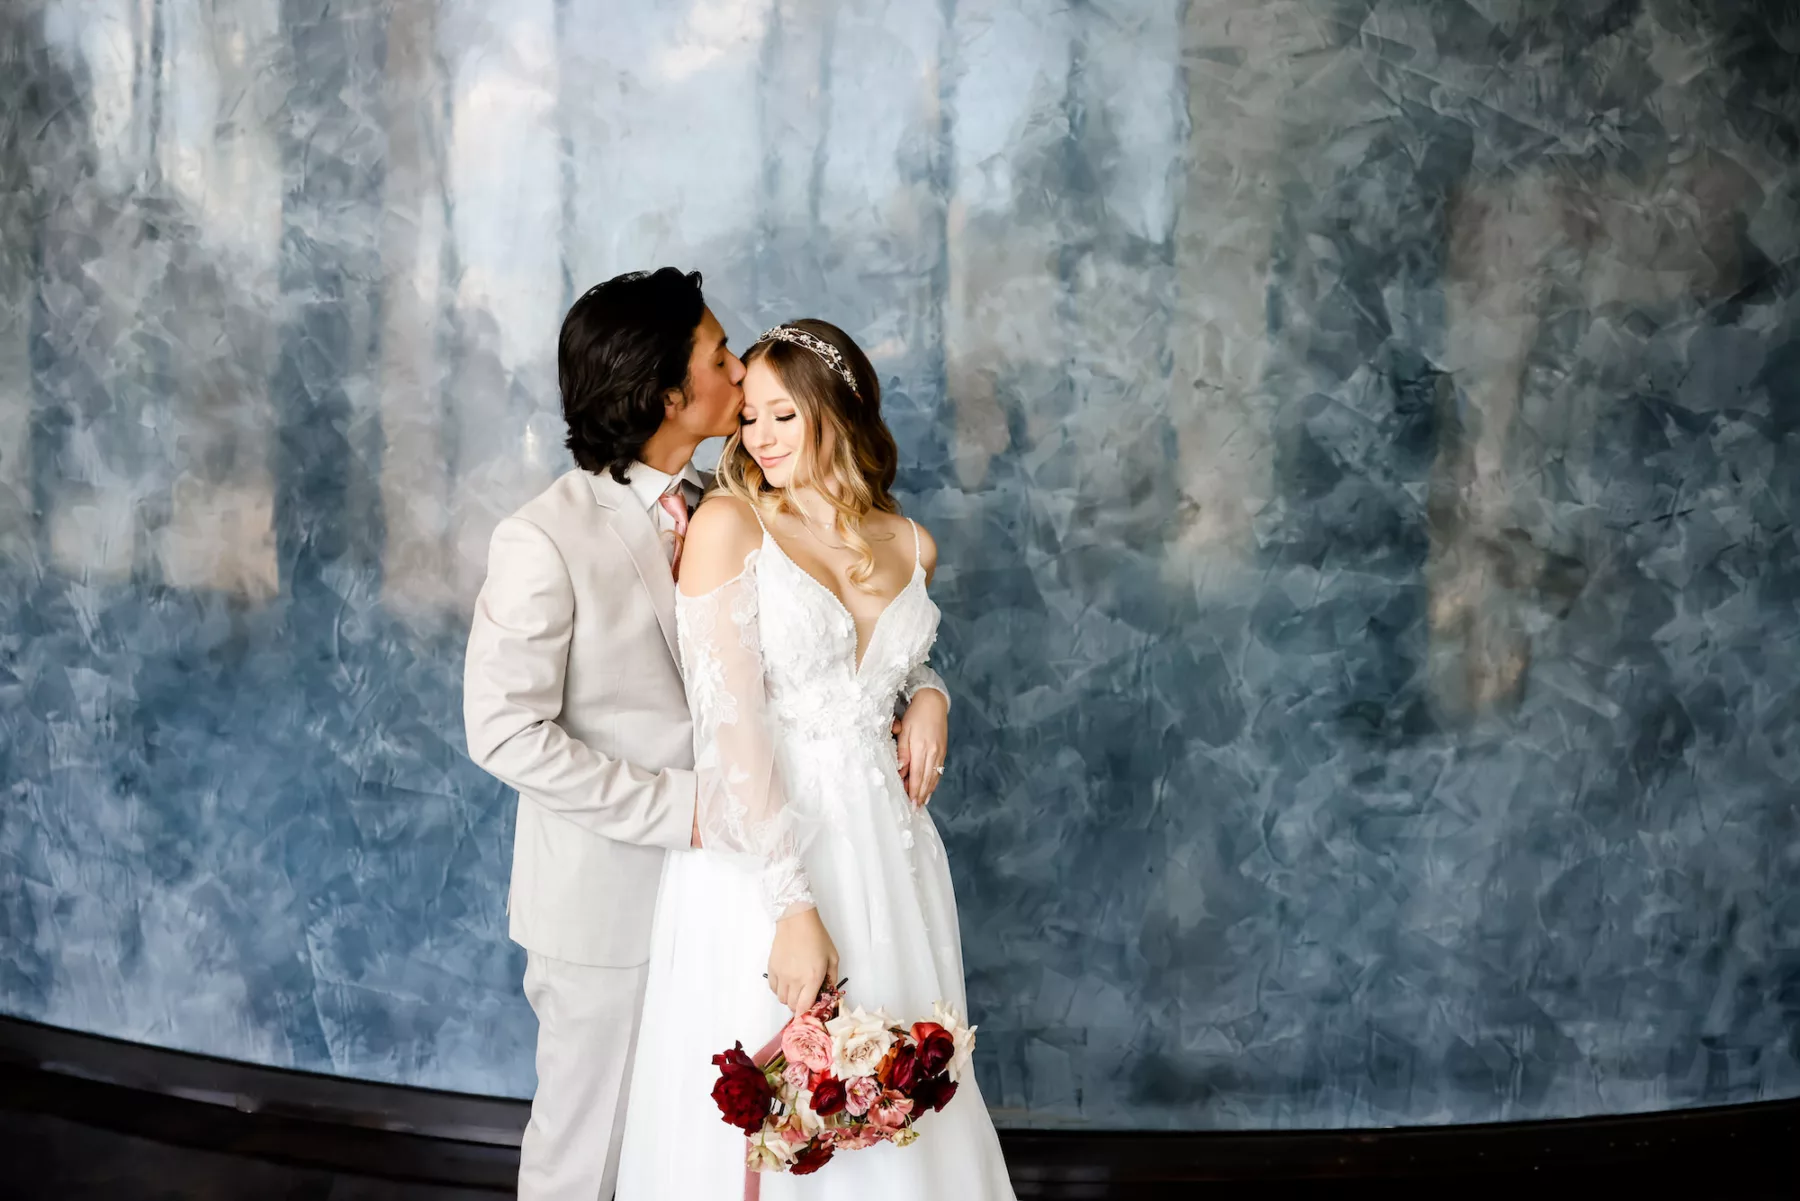 Bride and Groom First Look Wedding Portrait | Tampa Bay Photographer Lifelong Photography Studio | Hair and Makeup Artist Adore Bridal Services | Venue Hotel Haya